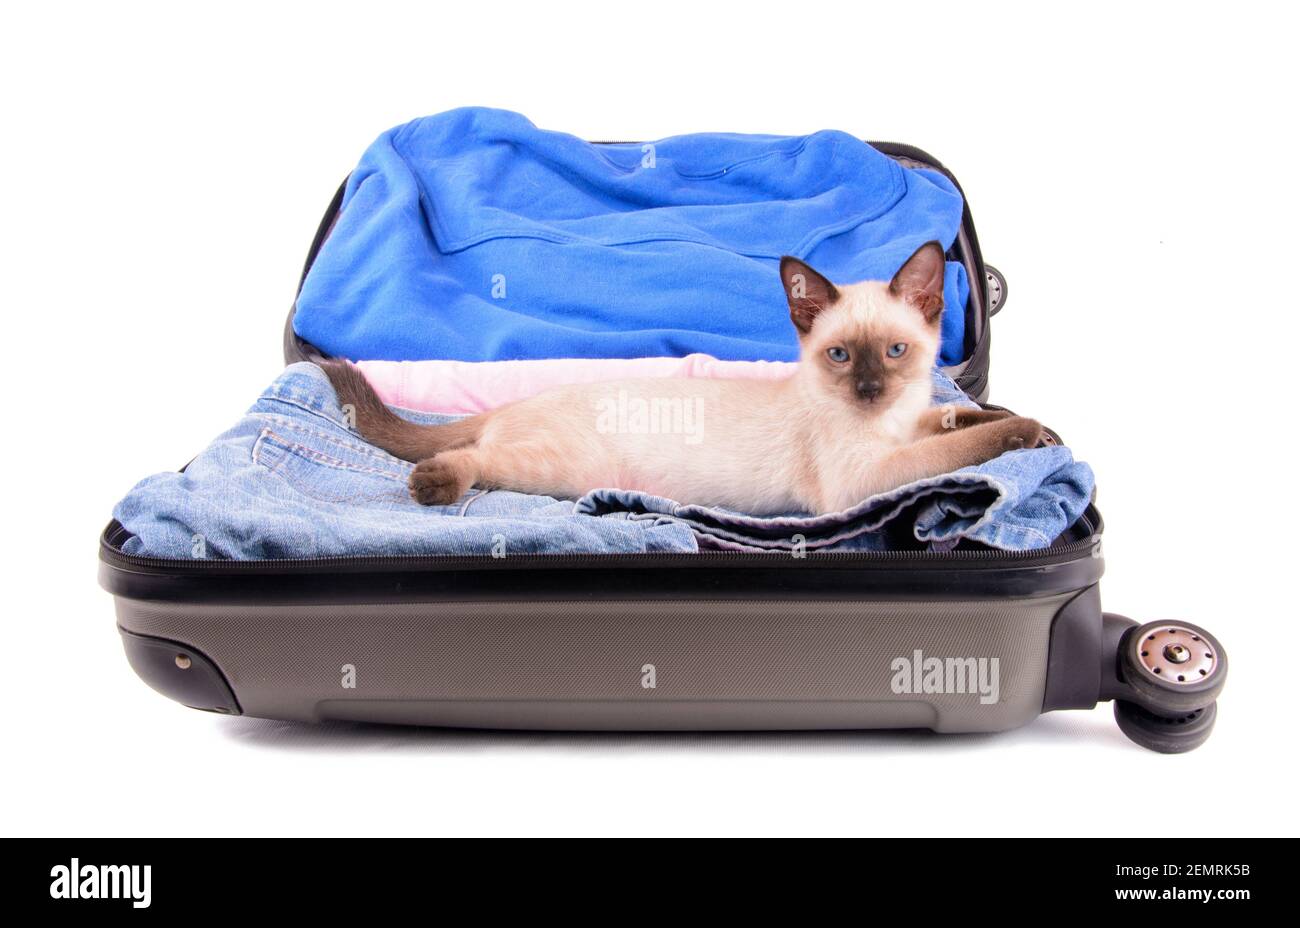 Young Siamese cat in a packed up open suitcase, ready for travel; on white background Stock Photo